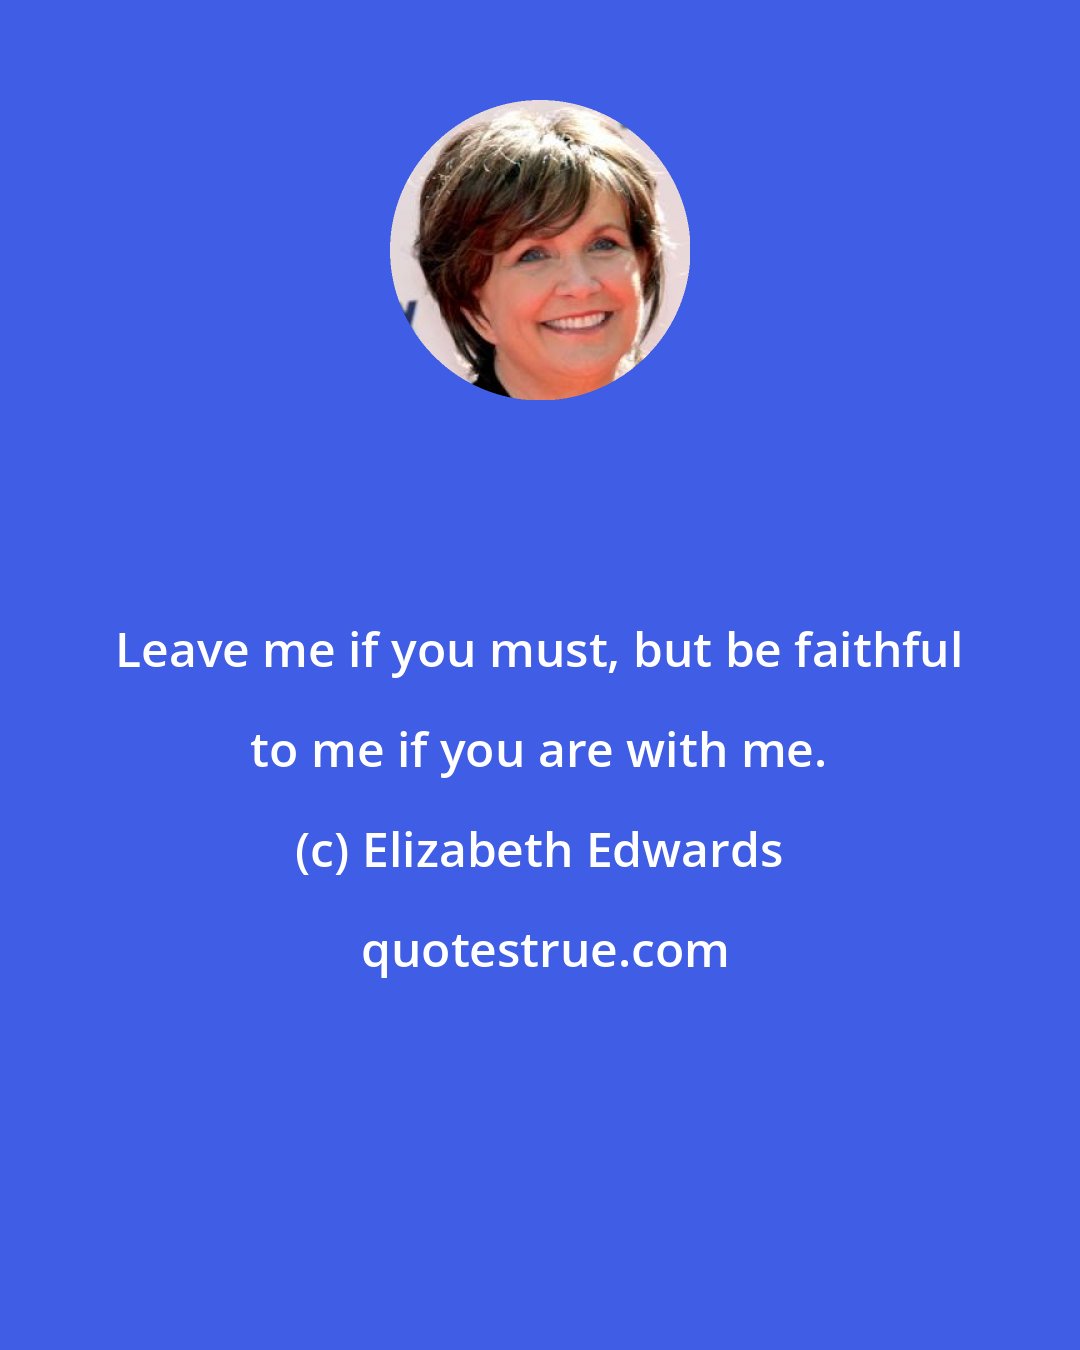 Elizabeth Edwards: Leave me if you must, but be faithful to me if you are with me.